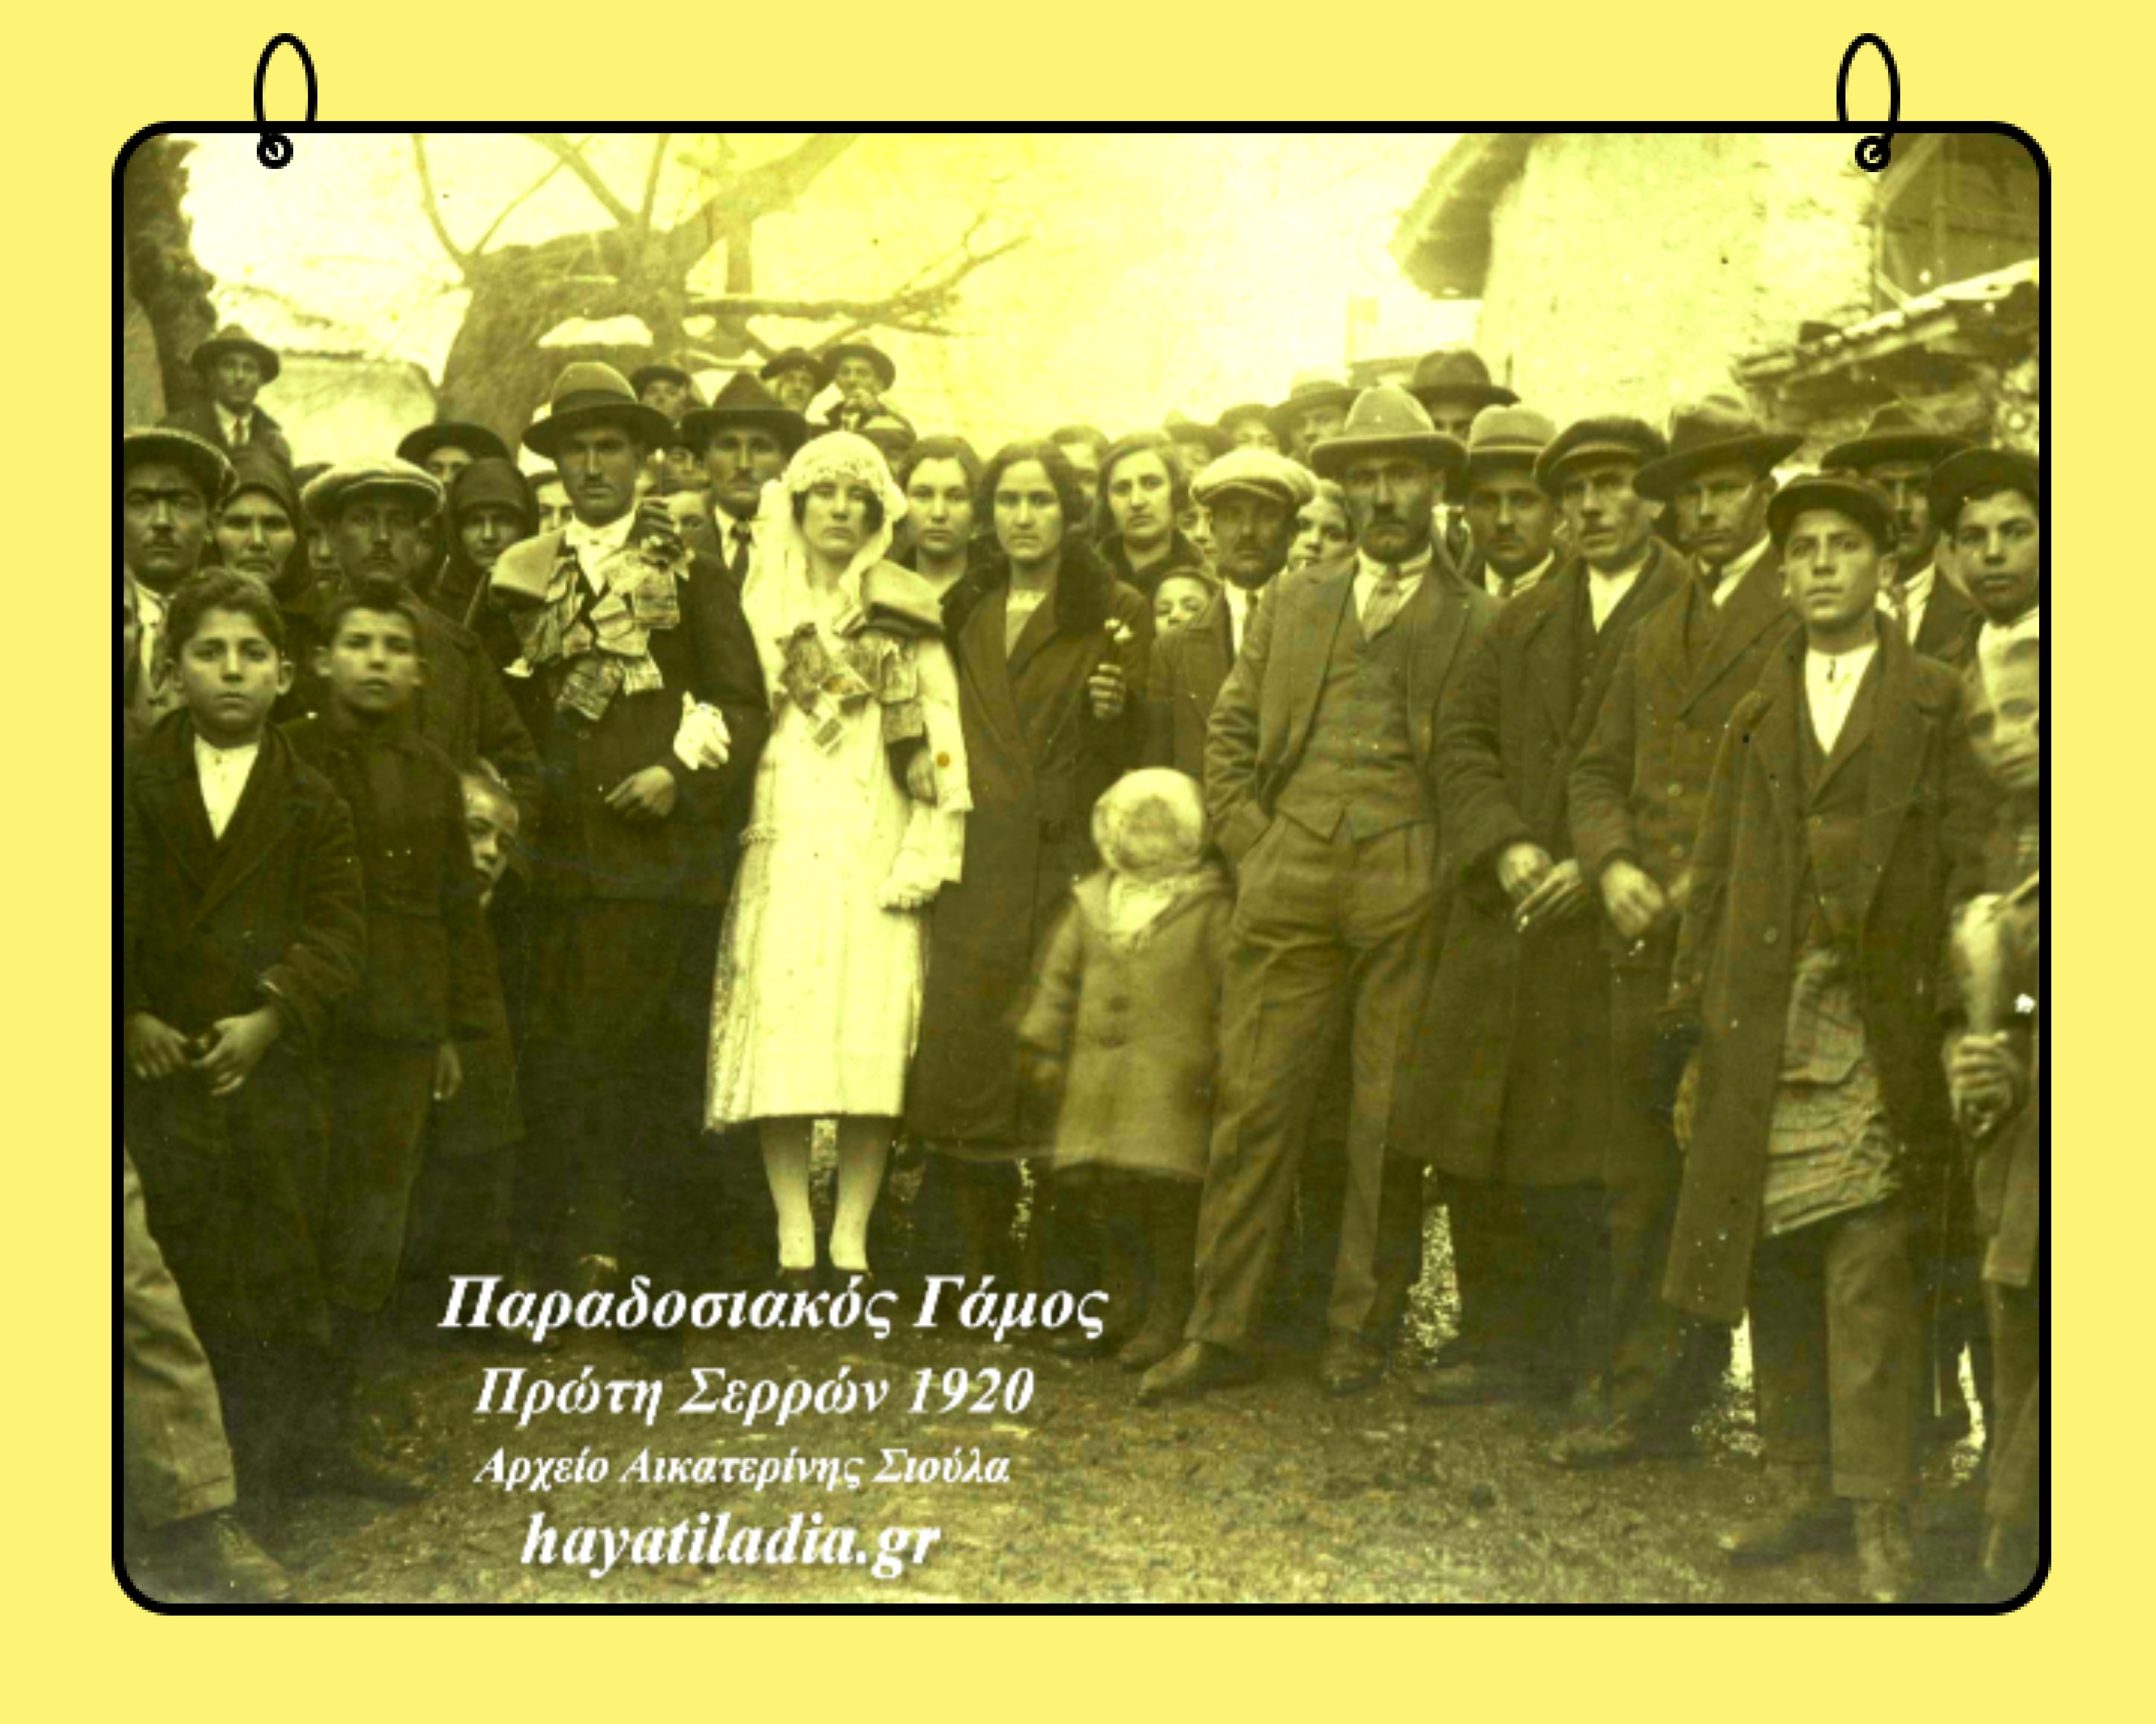 Traditional wedding in Proti Serres in 1920